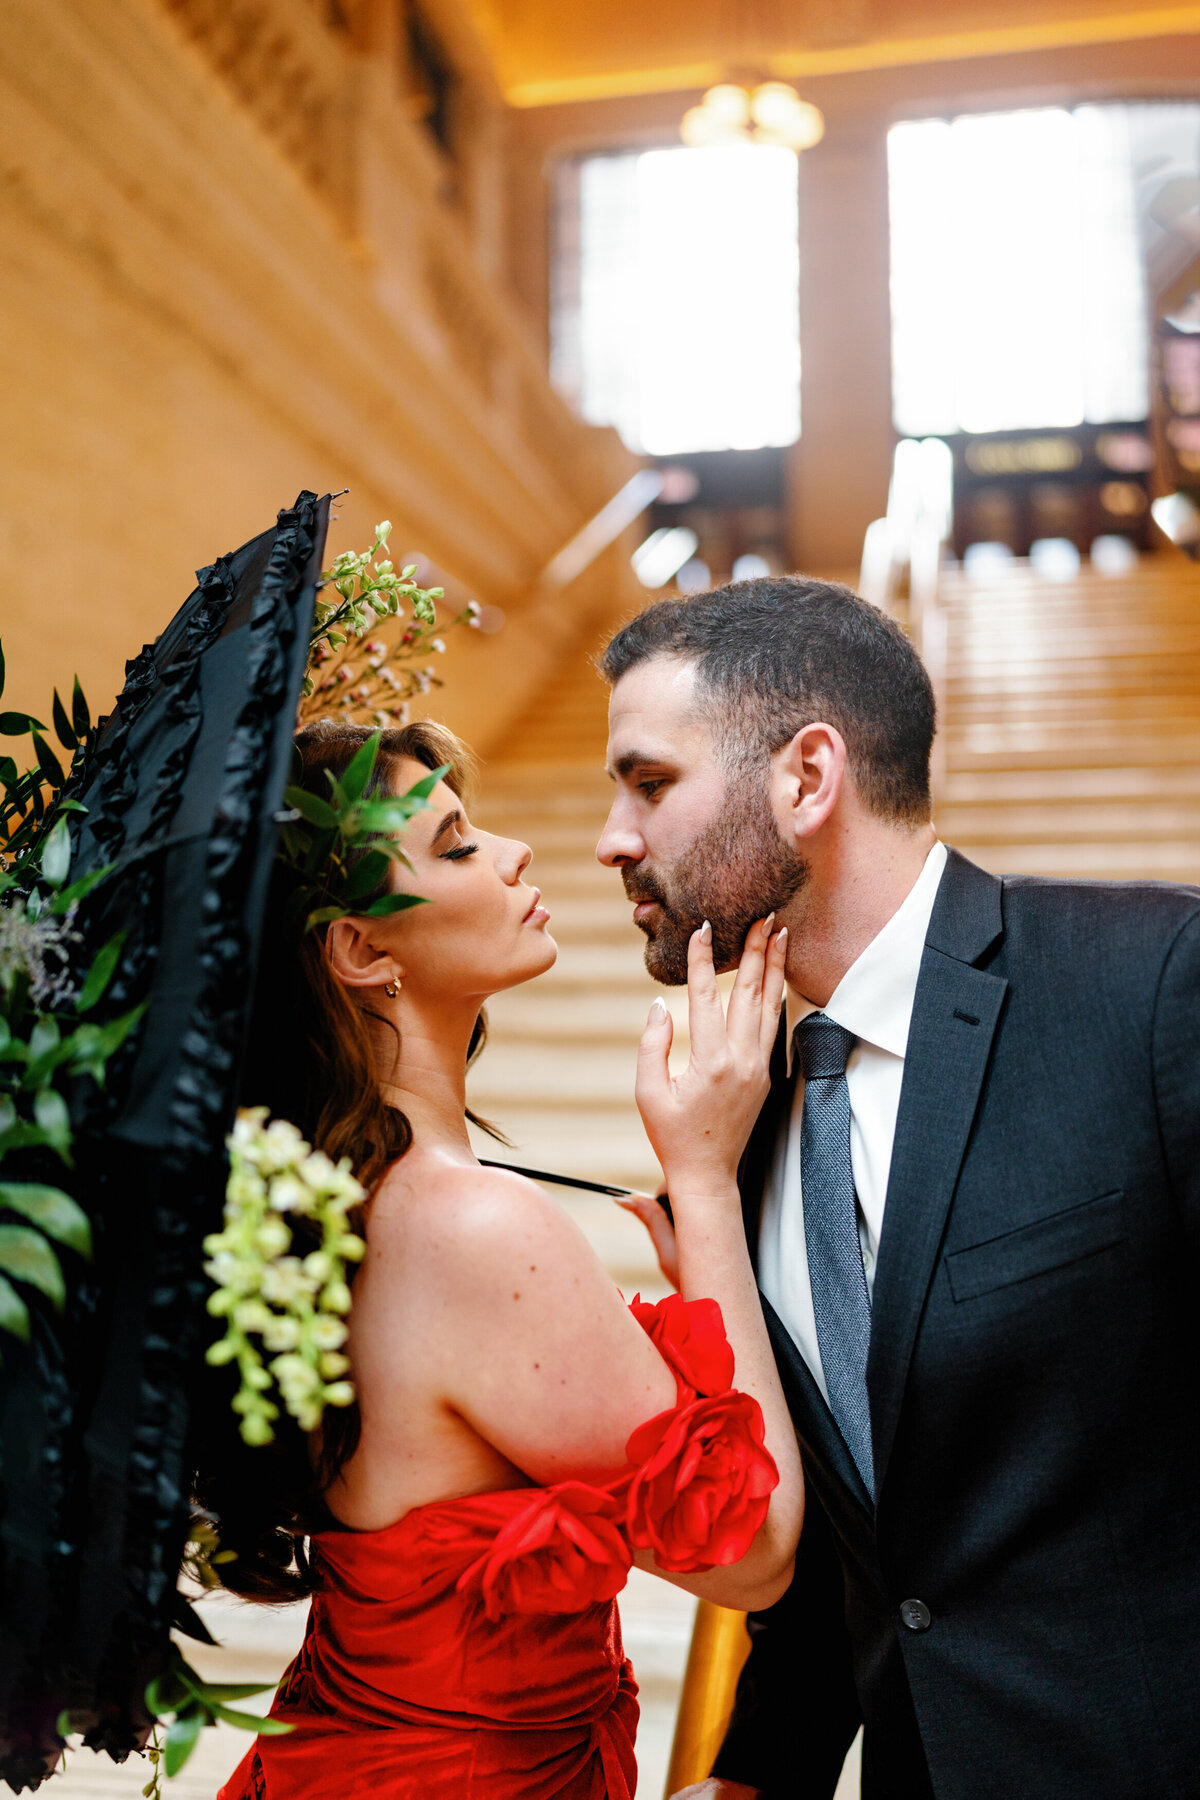 Aspen-Avenue-Chicago-Wedding-Photographer-Union-Station-Chicago-Theater-Engagement-Session-Timeless-Romantic-Red-Dress-Editorial-Stemming-From-Love-Bry-Jean-Artistry-The-Bridal-Collective-True-to-color-Luxury-FAV-31